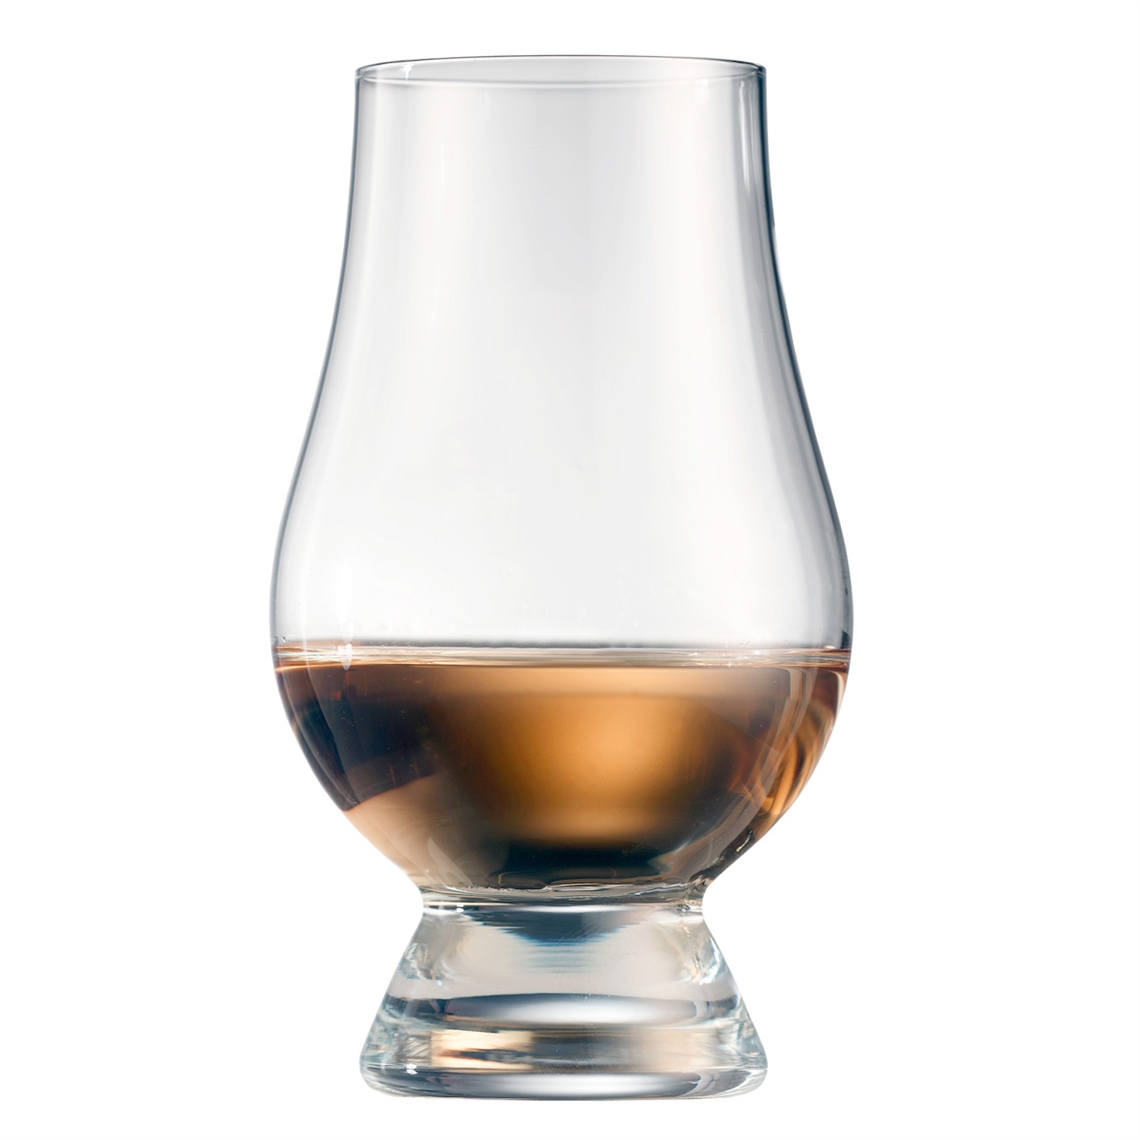 View more what are stemless wine glasses? from our Whisky Glasses range